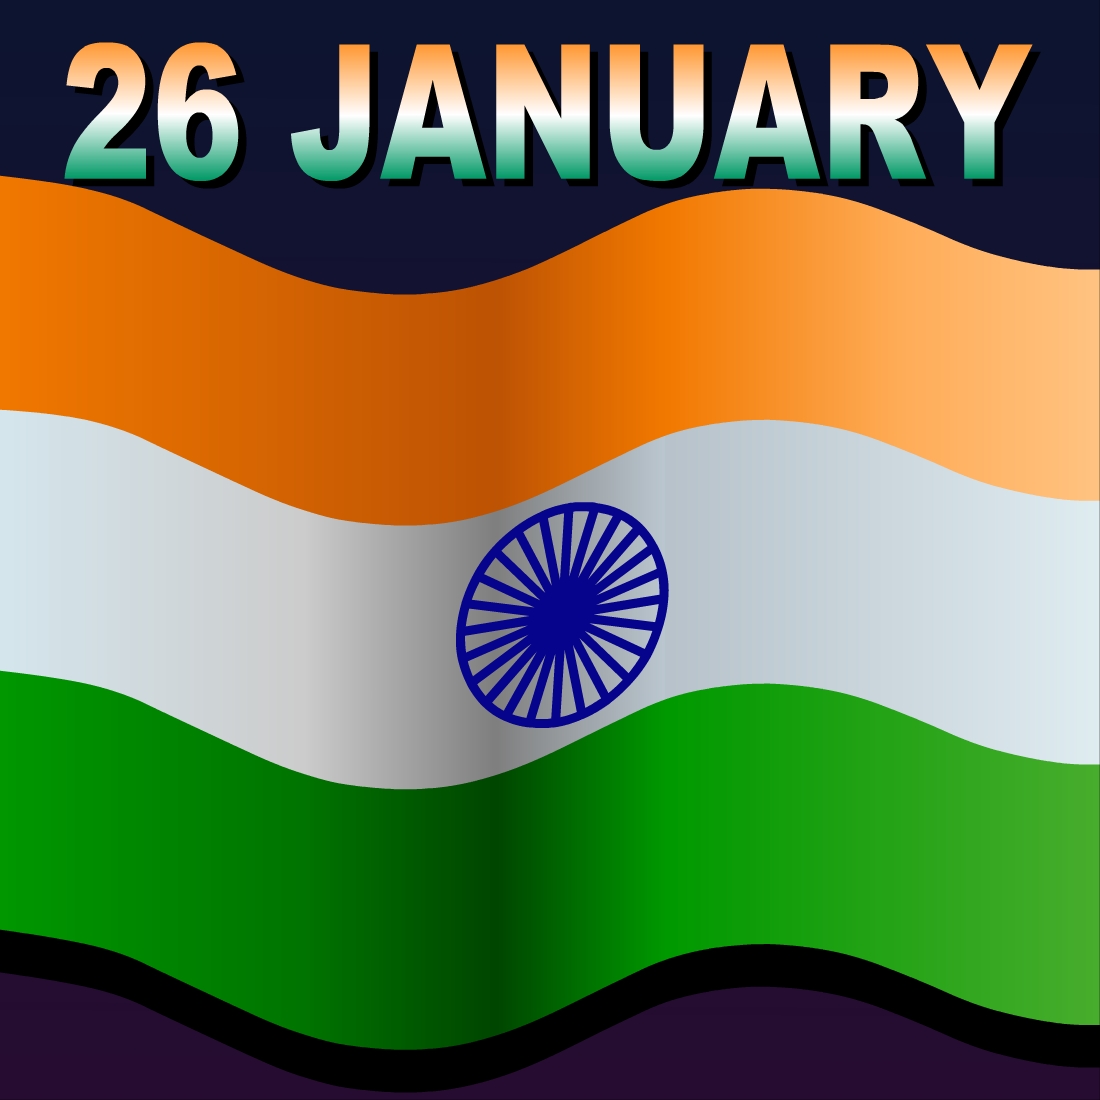 Colorful image of Indian flag